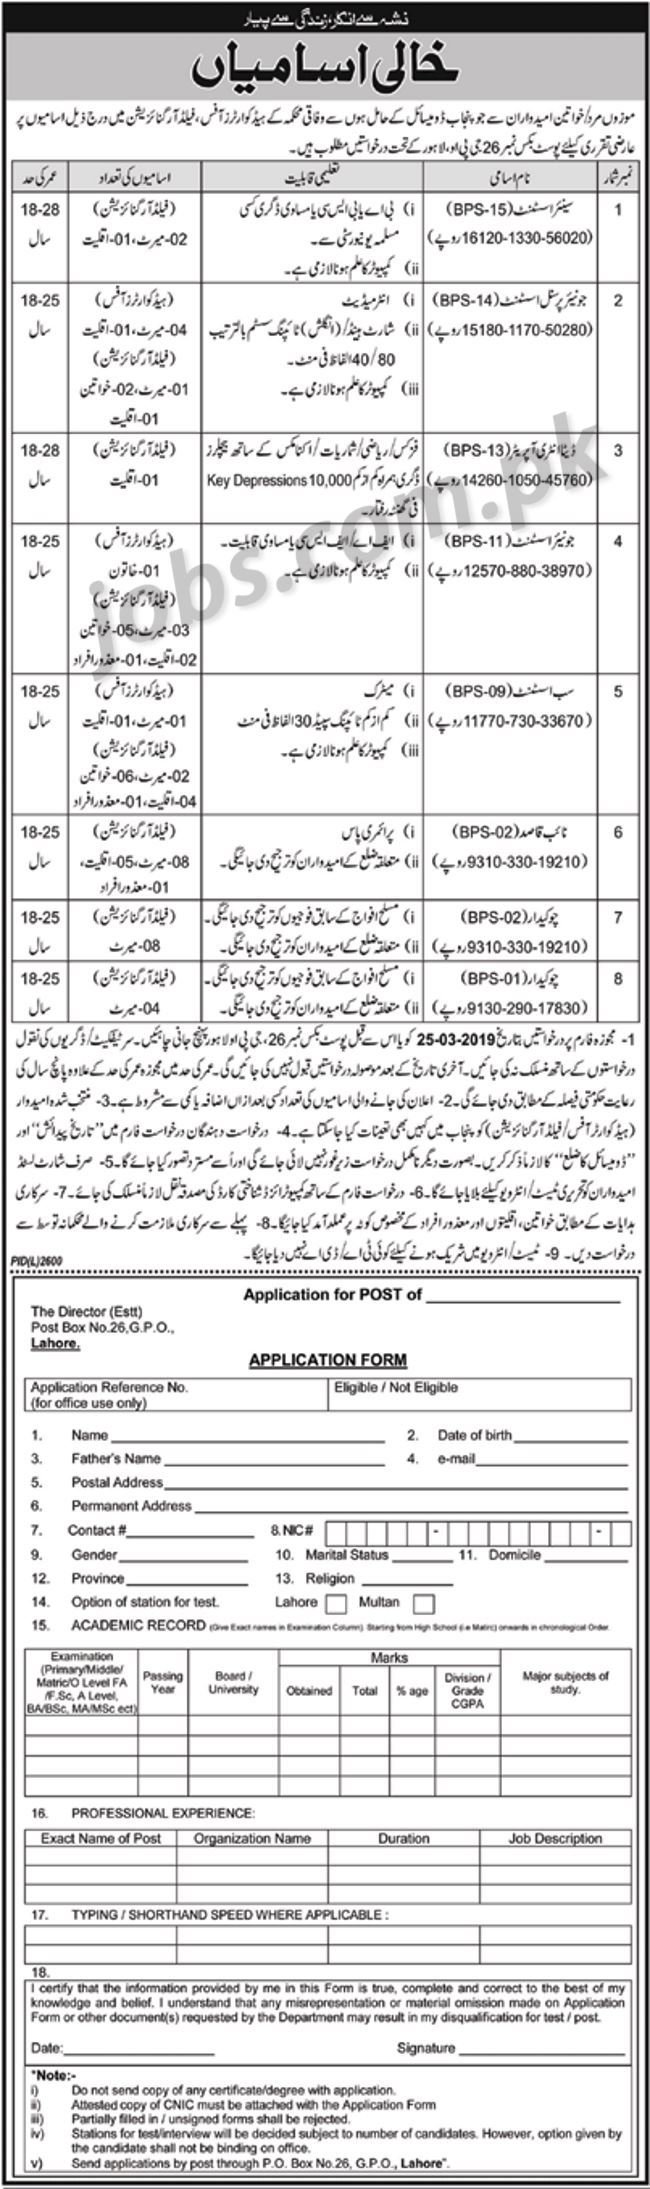 PO Box 26 Public Sector Organization Jobs 2019 for 67+ Assistants, Jr Assistants, Sub-Assistants, Data Entry Operators & Other Posts